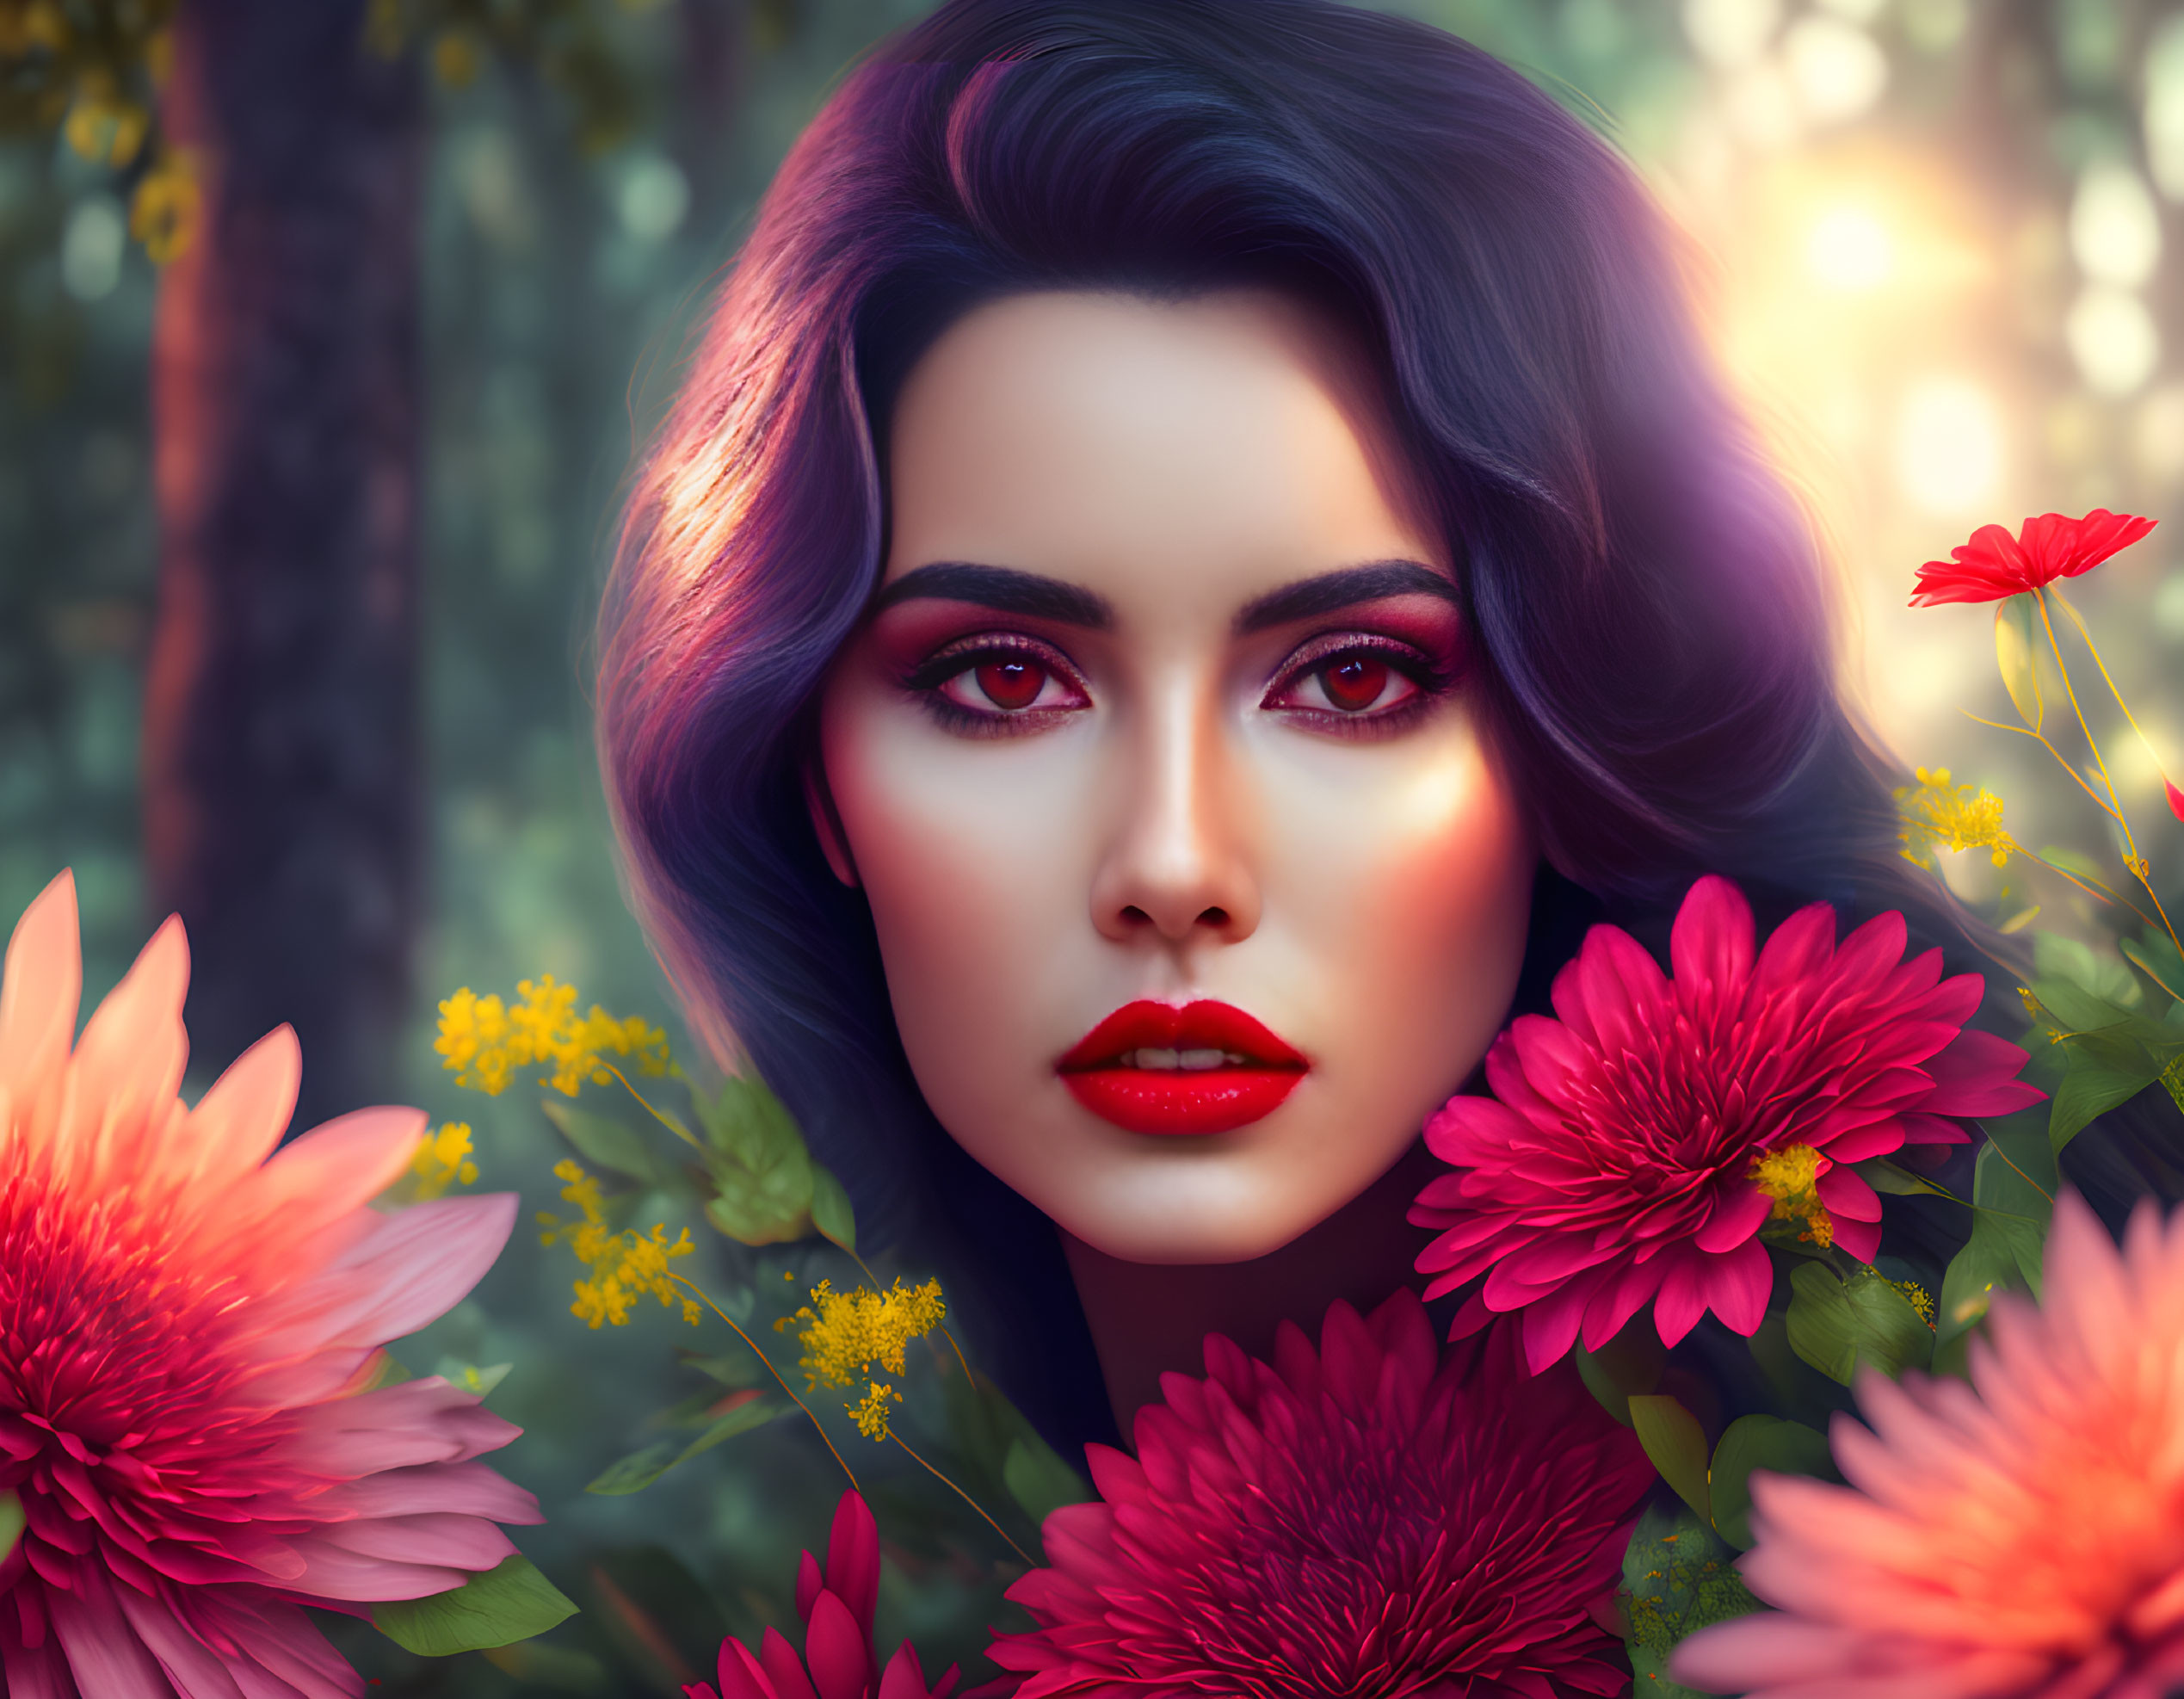 Digital portrait of woman with striking makeup among red and yellow flowers in forest setting